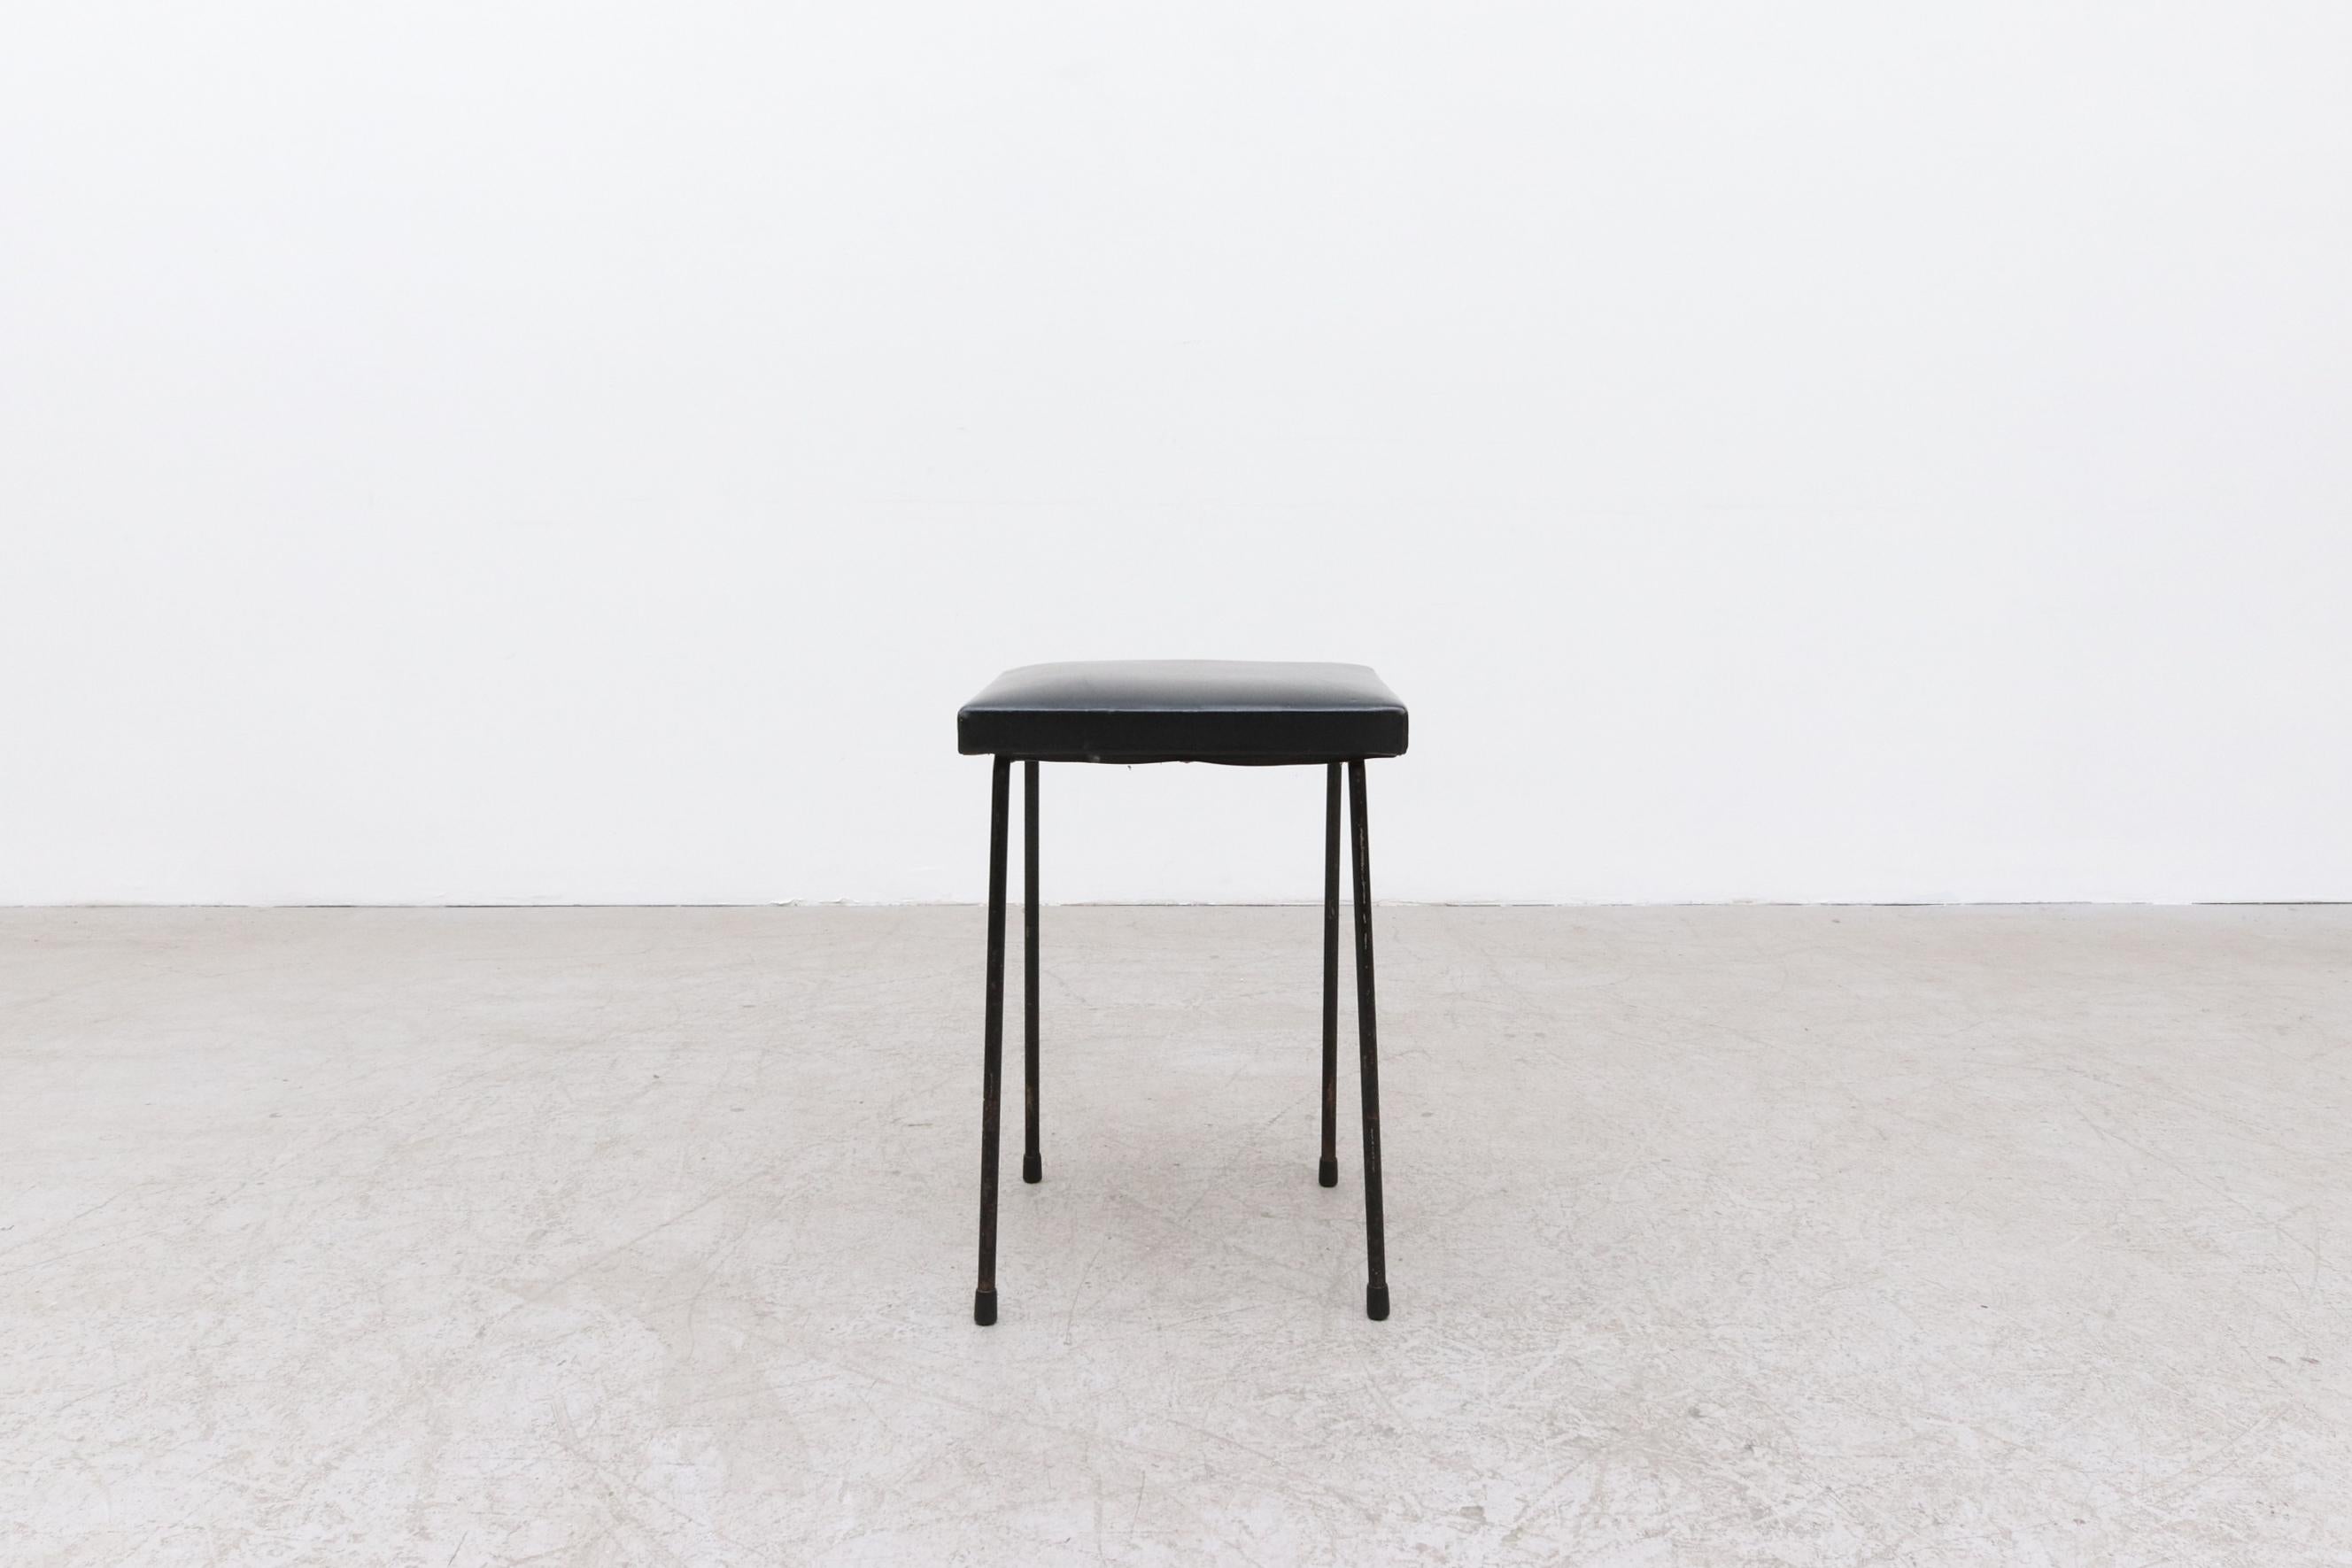 Little Kembo Stool with Original Black Skai Upholstery and Black Enameled Metal Frame. In very original condition with visible wear including chipping to frame and minor tears/scratches on the seat. Wear is consistent with its age and use.